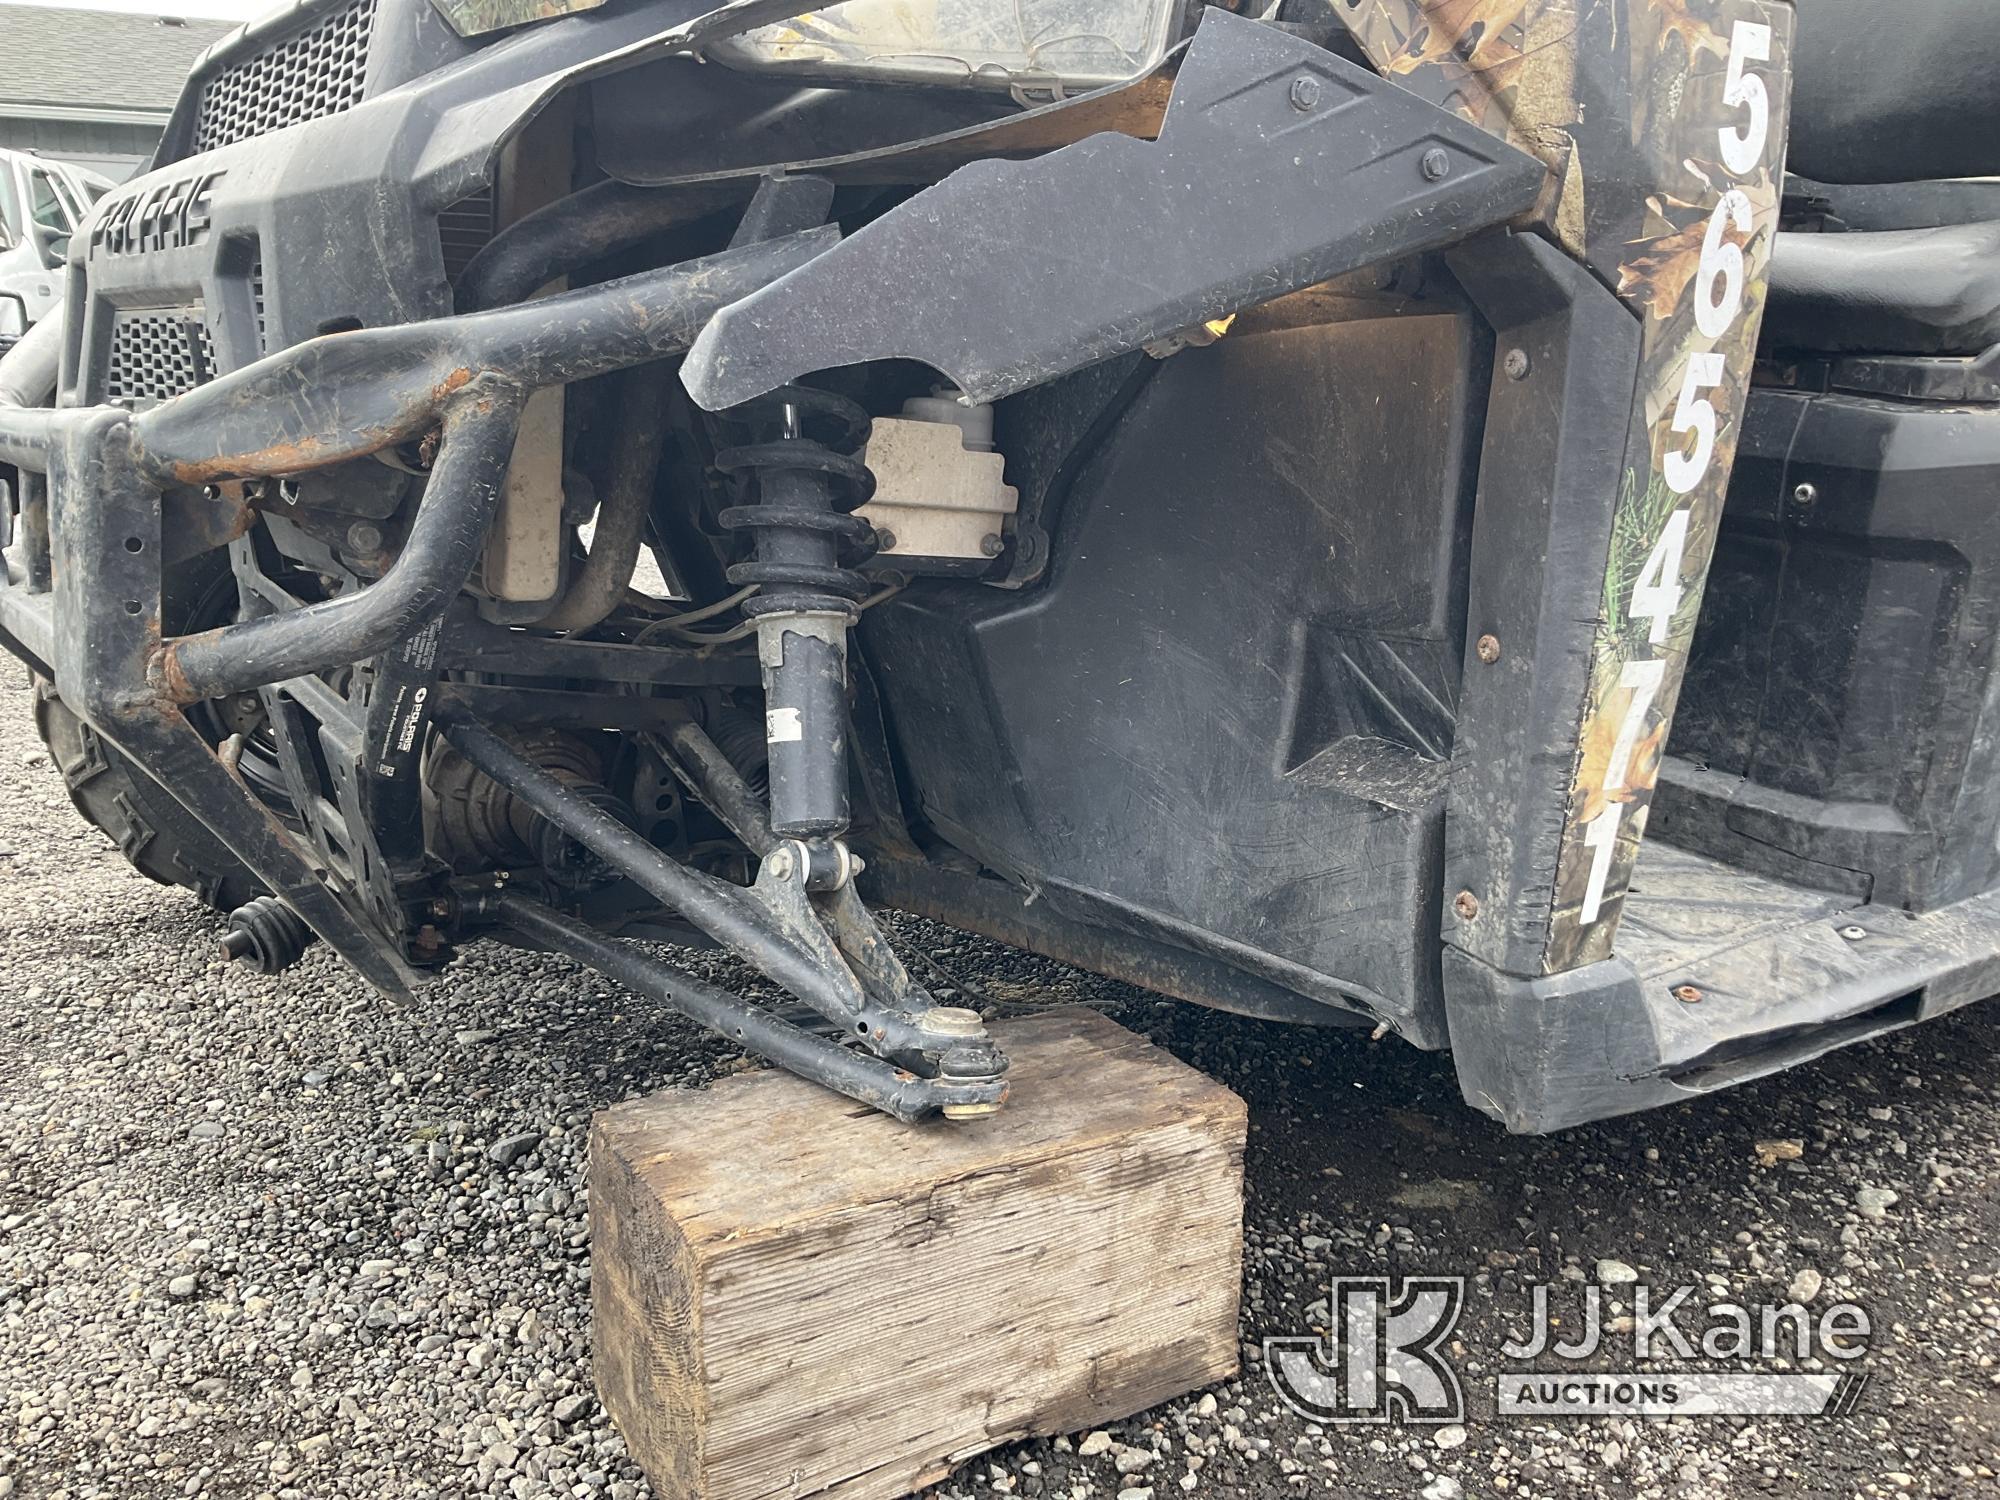 (Tacoma, WA) 2019 Polaris XP 900 EPS All-Terrain Vehicle Not Running, Condition Unknown) (Body Damag